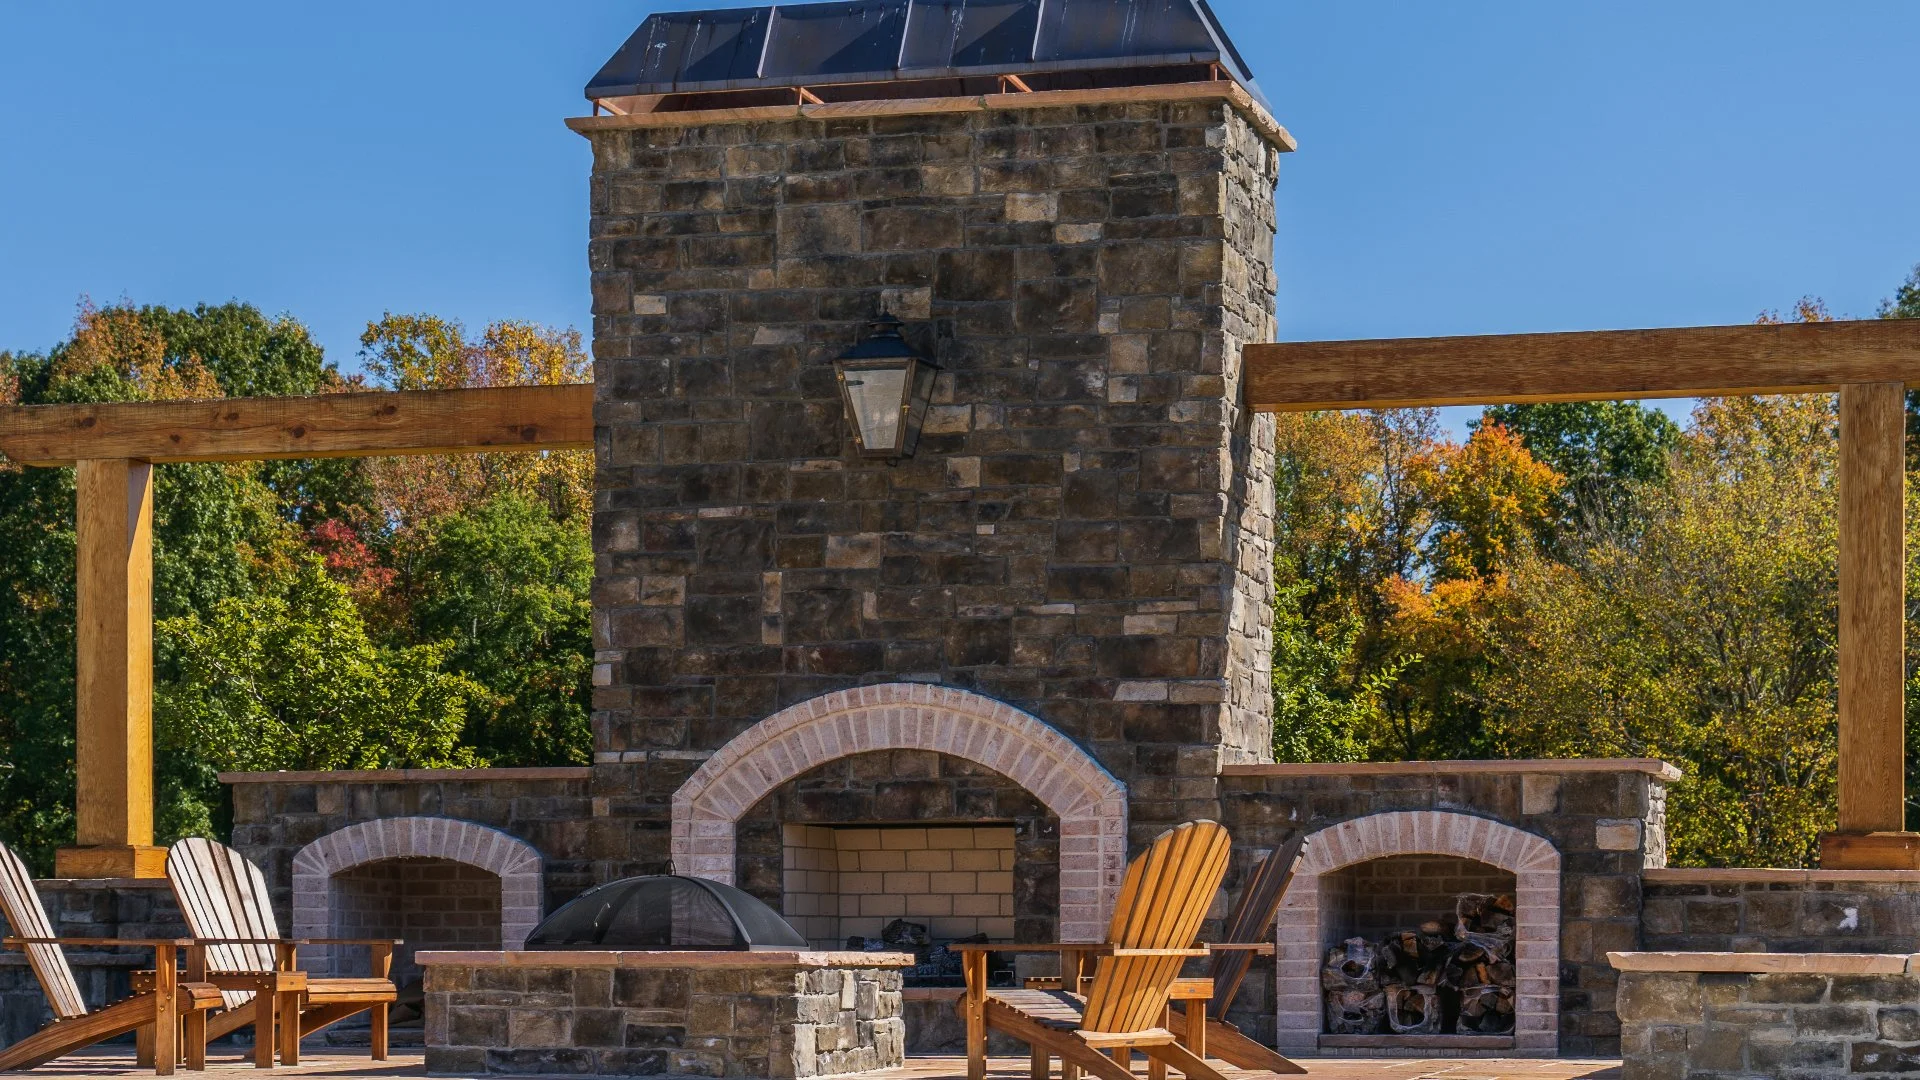 Investing in an Outdoor Fireplace Is Totally Worth It - Here’s Why!